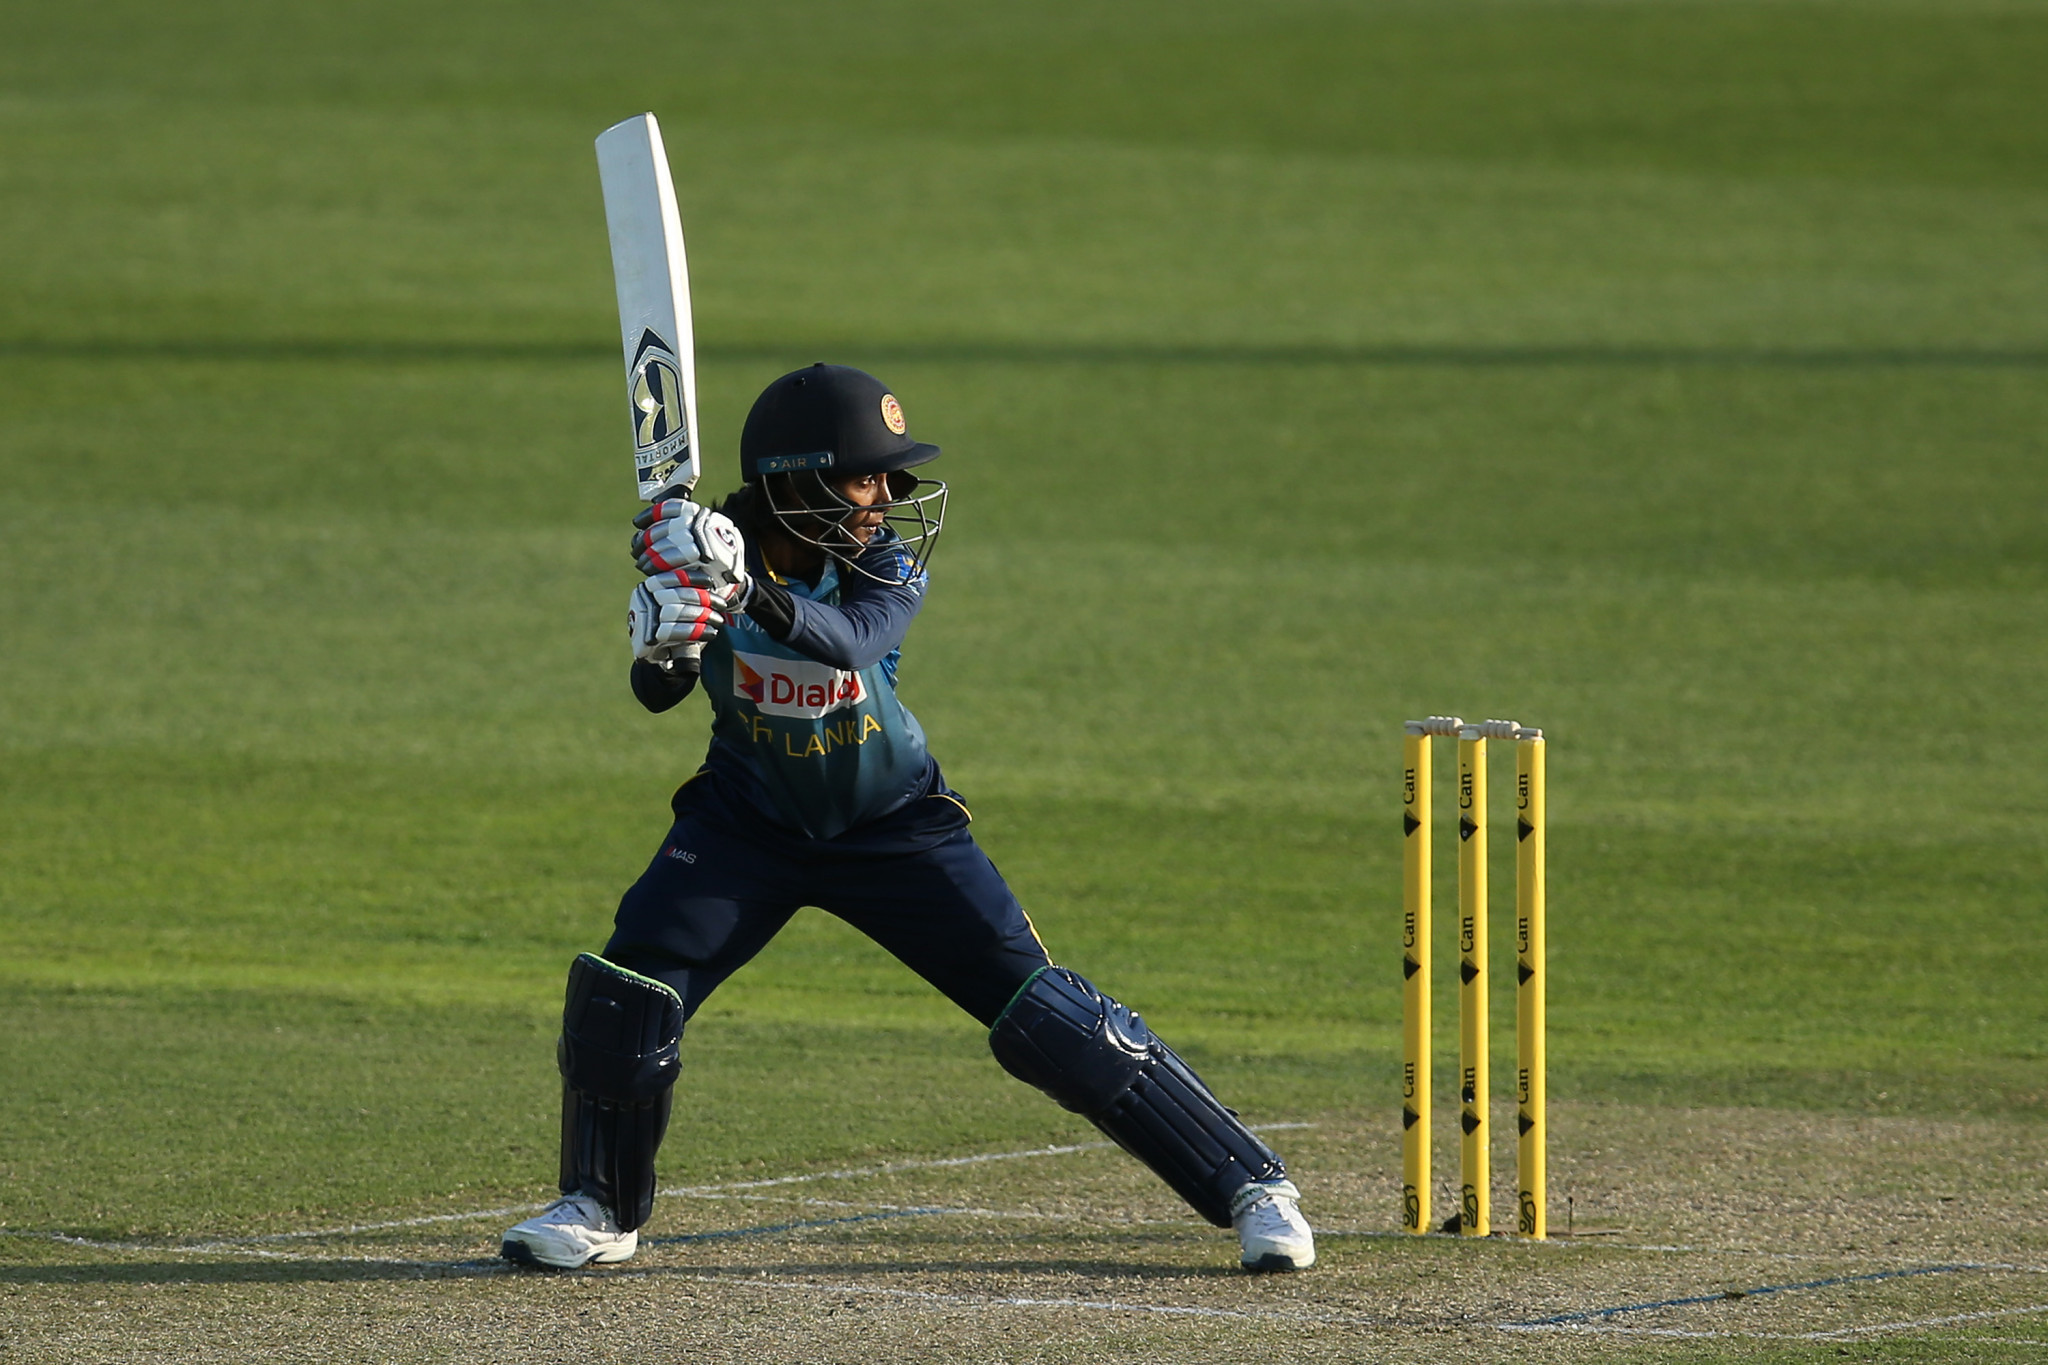 Harshitha Madavi starred with an unbeaten 62 in Sri Lanka's win over Malaysia ©Getty Images